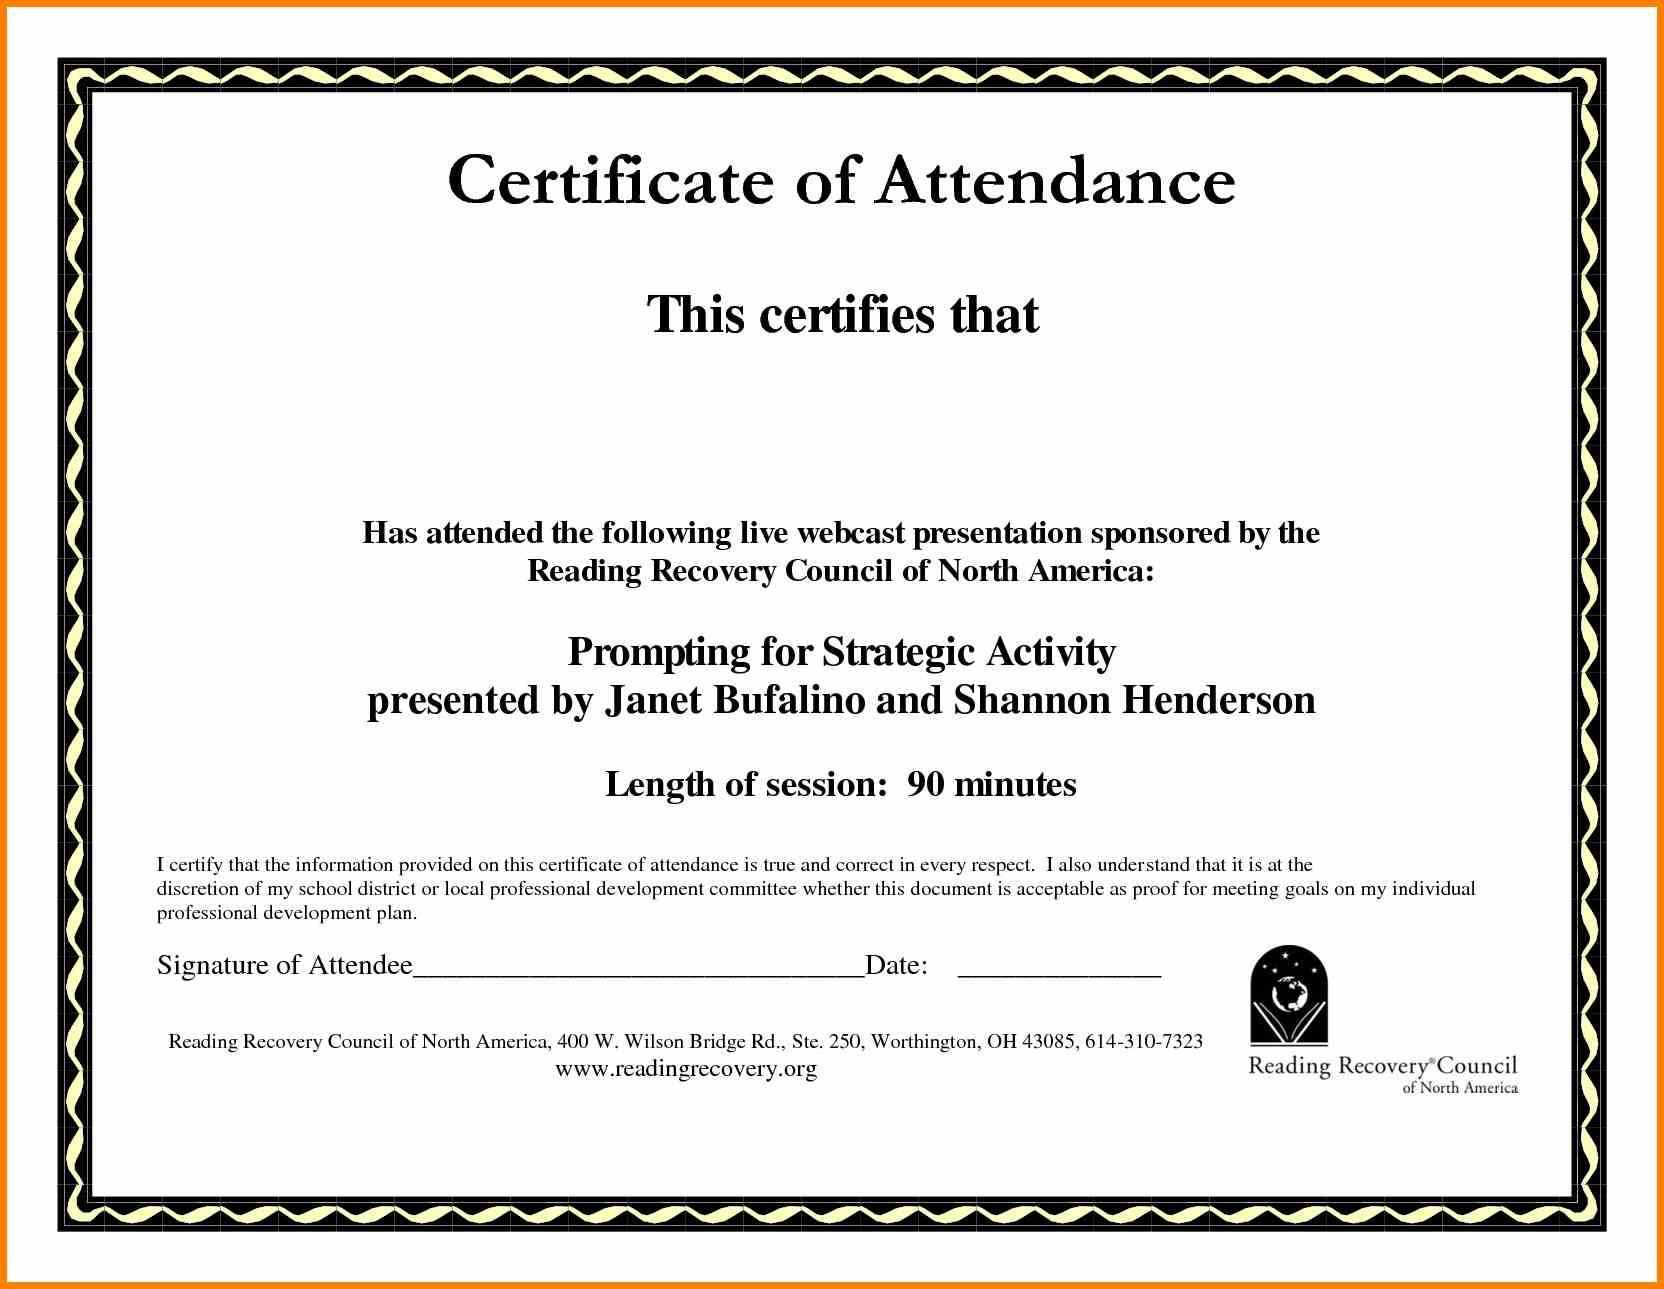 Certificate Of Attendance Template Word Ukran Agdiffusion Inside Conference Certificate Of Attendance Template